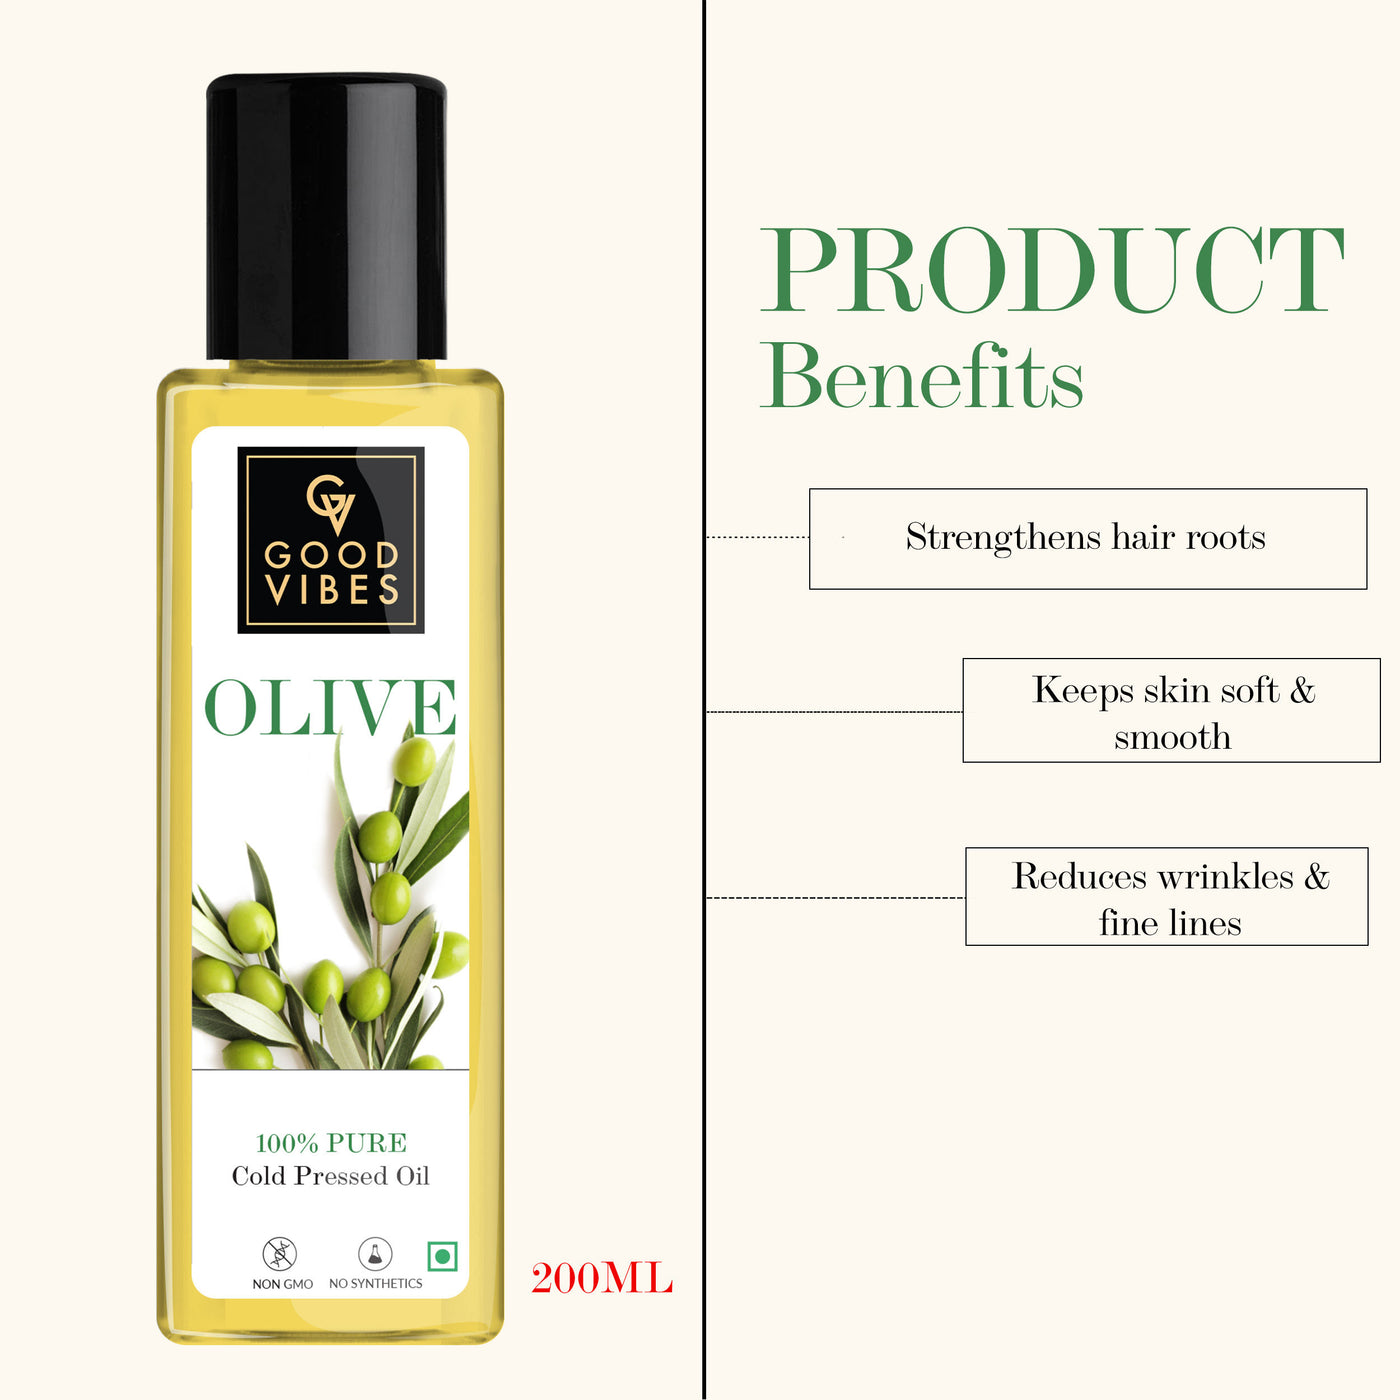 good-vibes-olive-100-percentage-pure-cold-pressed-carrier-oil-for-hair-and-skin-hair-repair-anti-ageing-no-parabens-no-animal-testing-200-ml-1-4